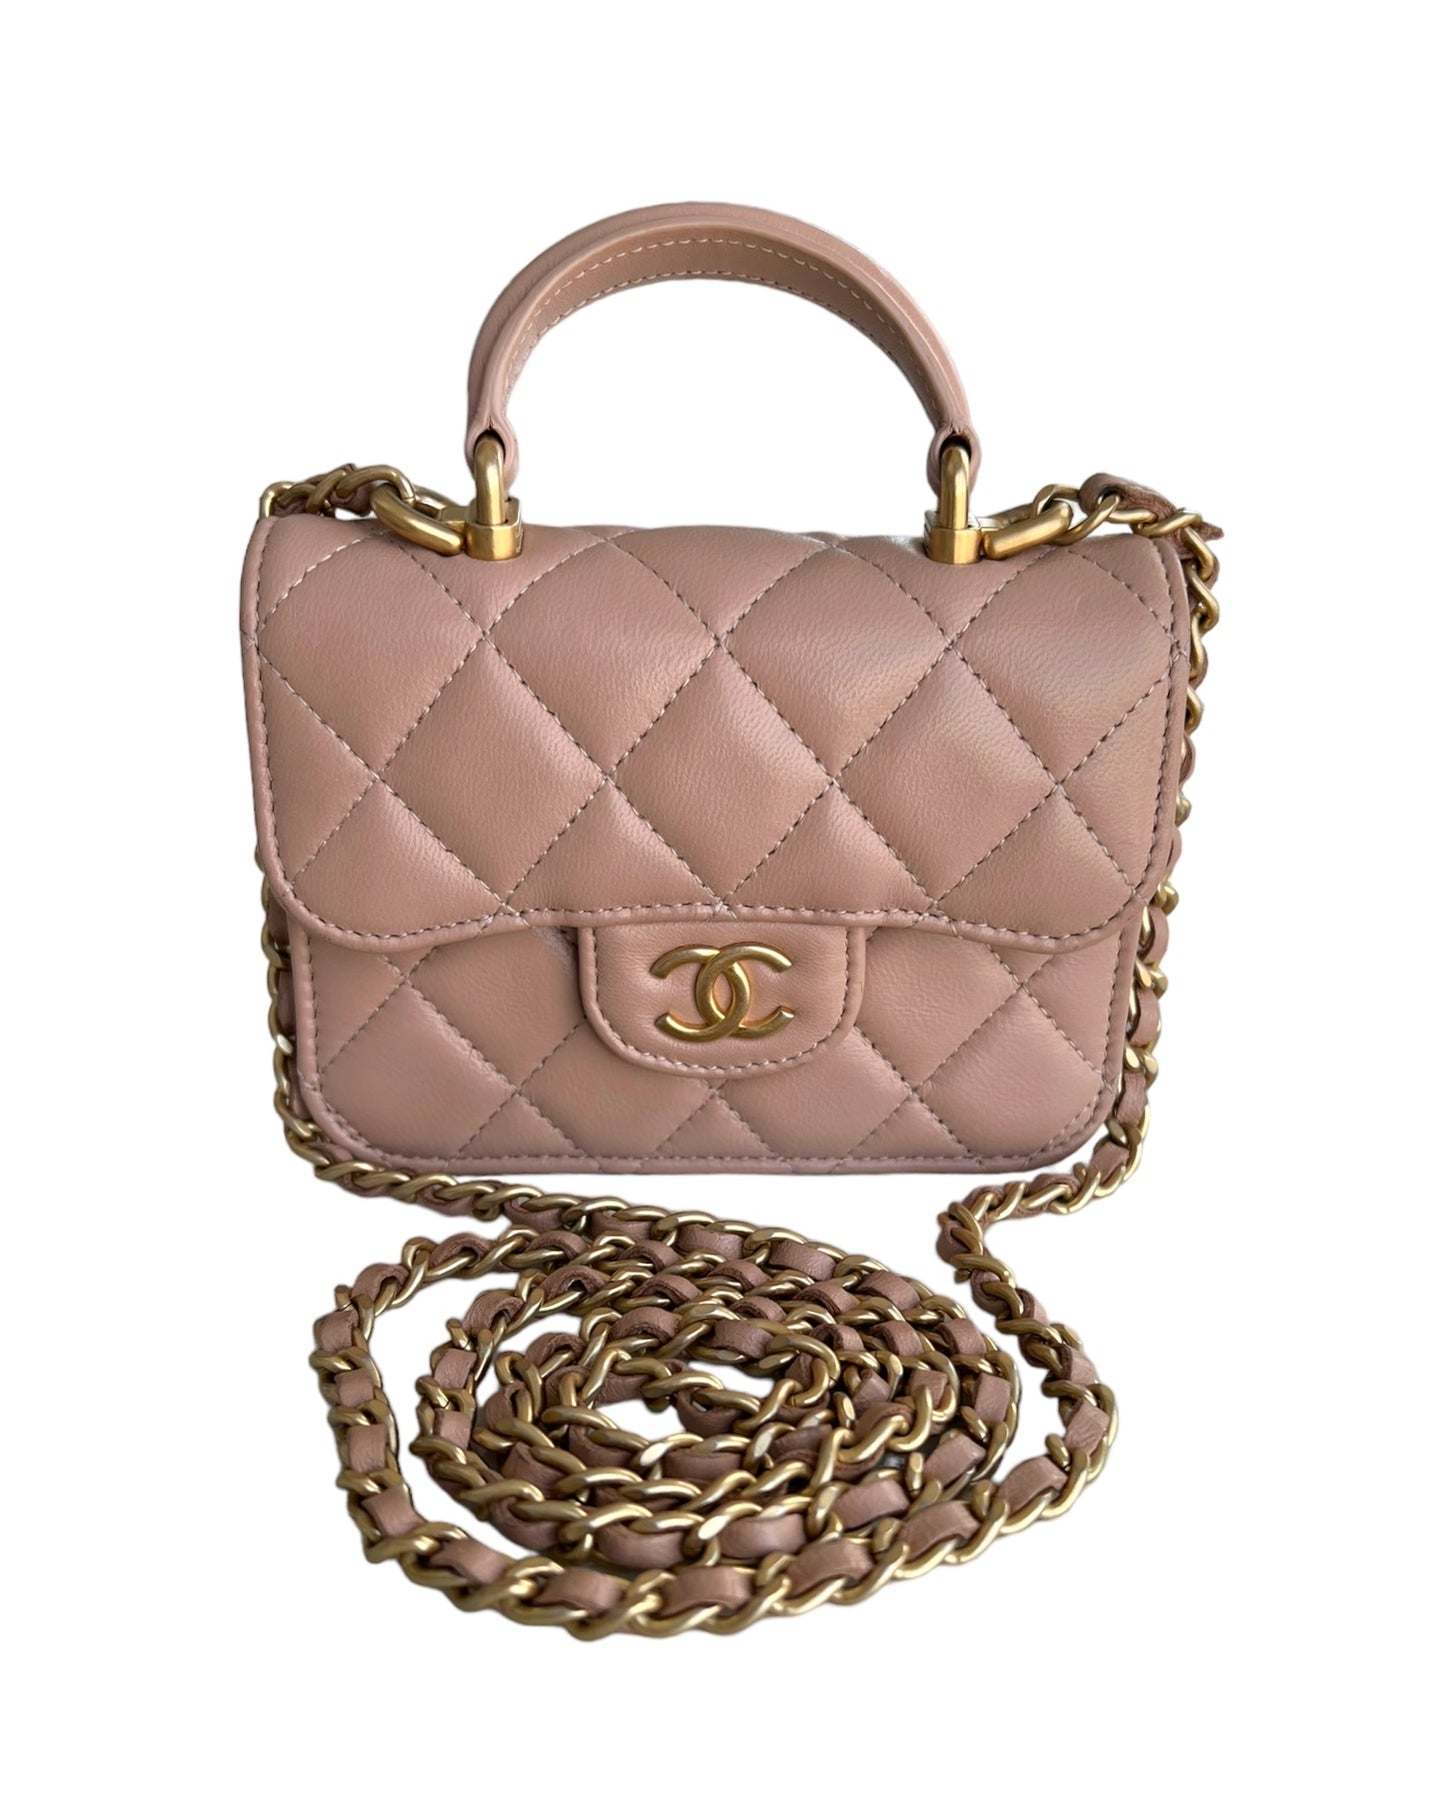 Chanel Top Handle Flap Beige Mini Bag on Chain with Box